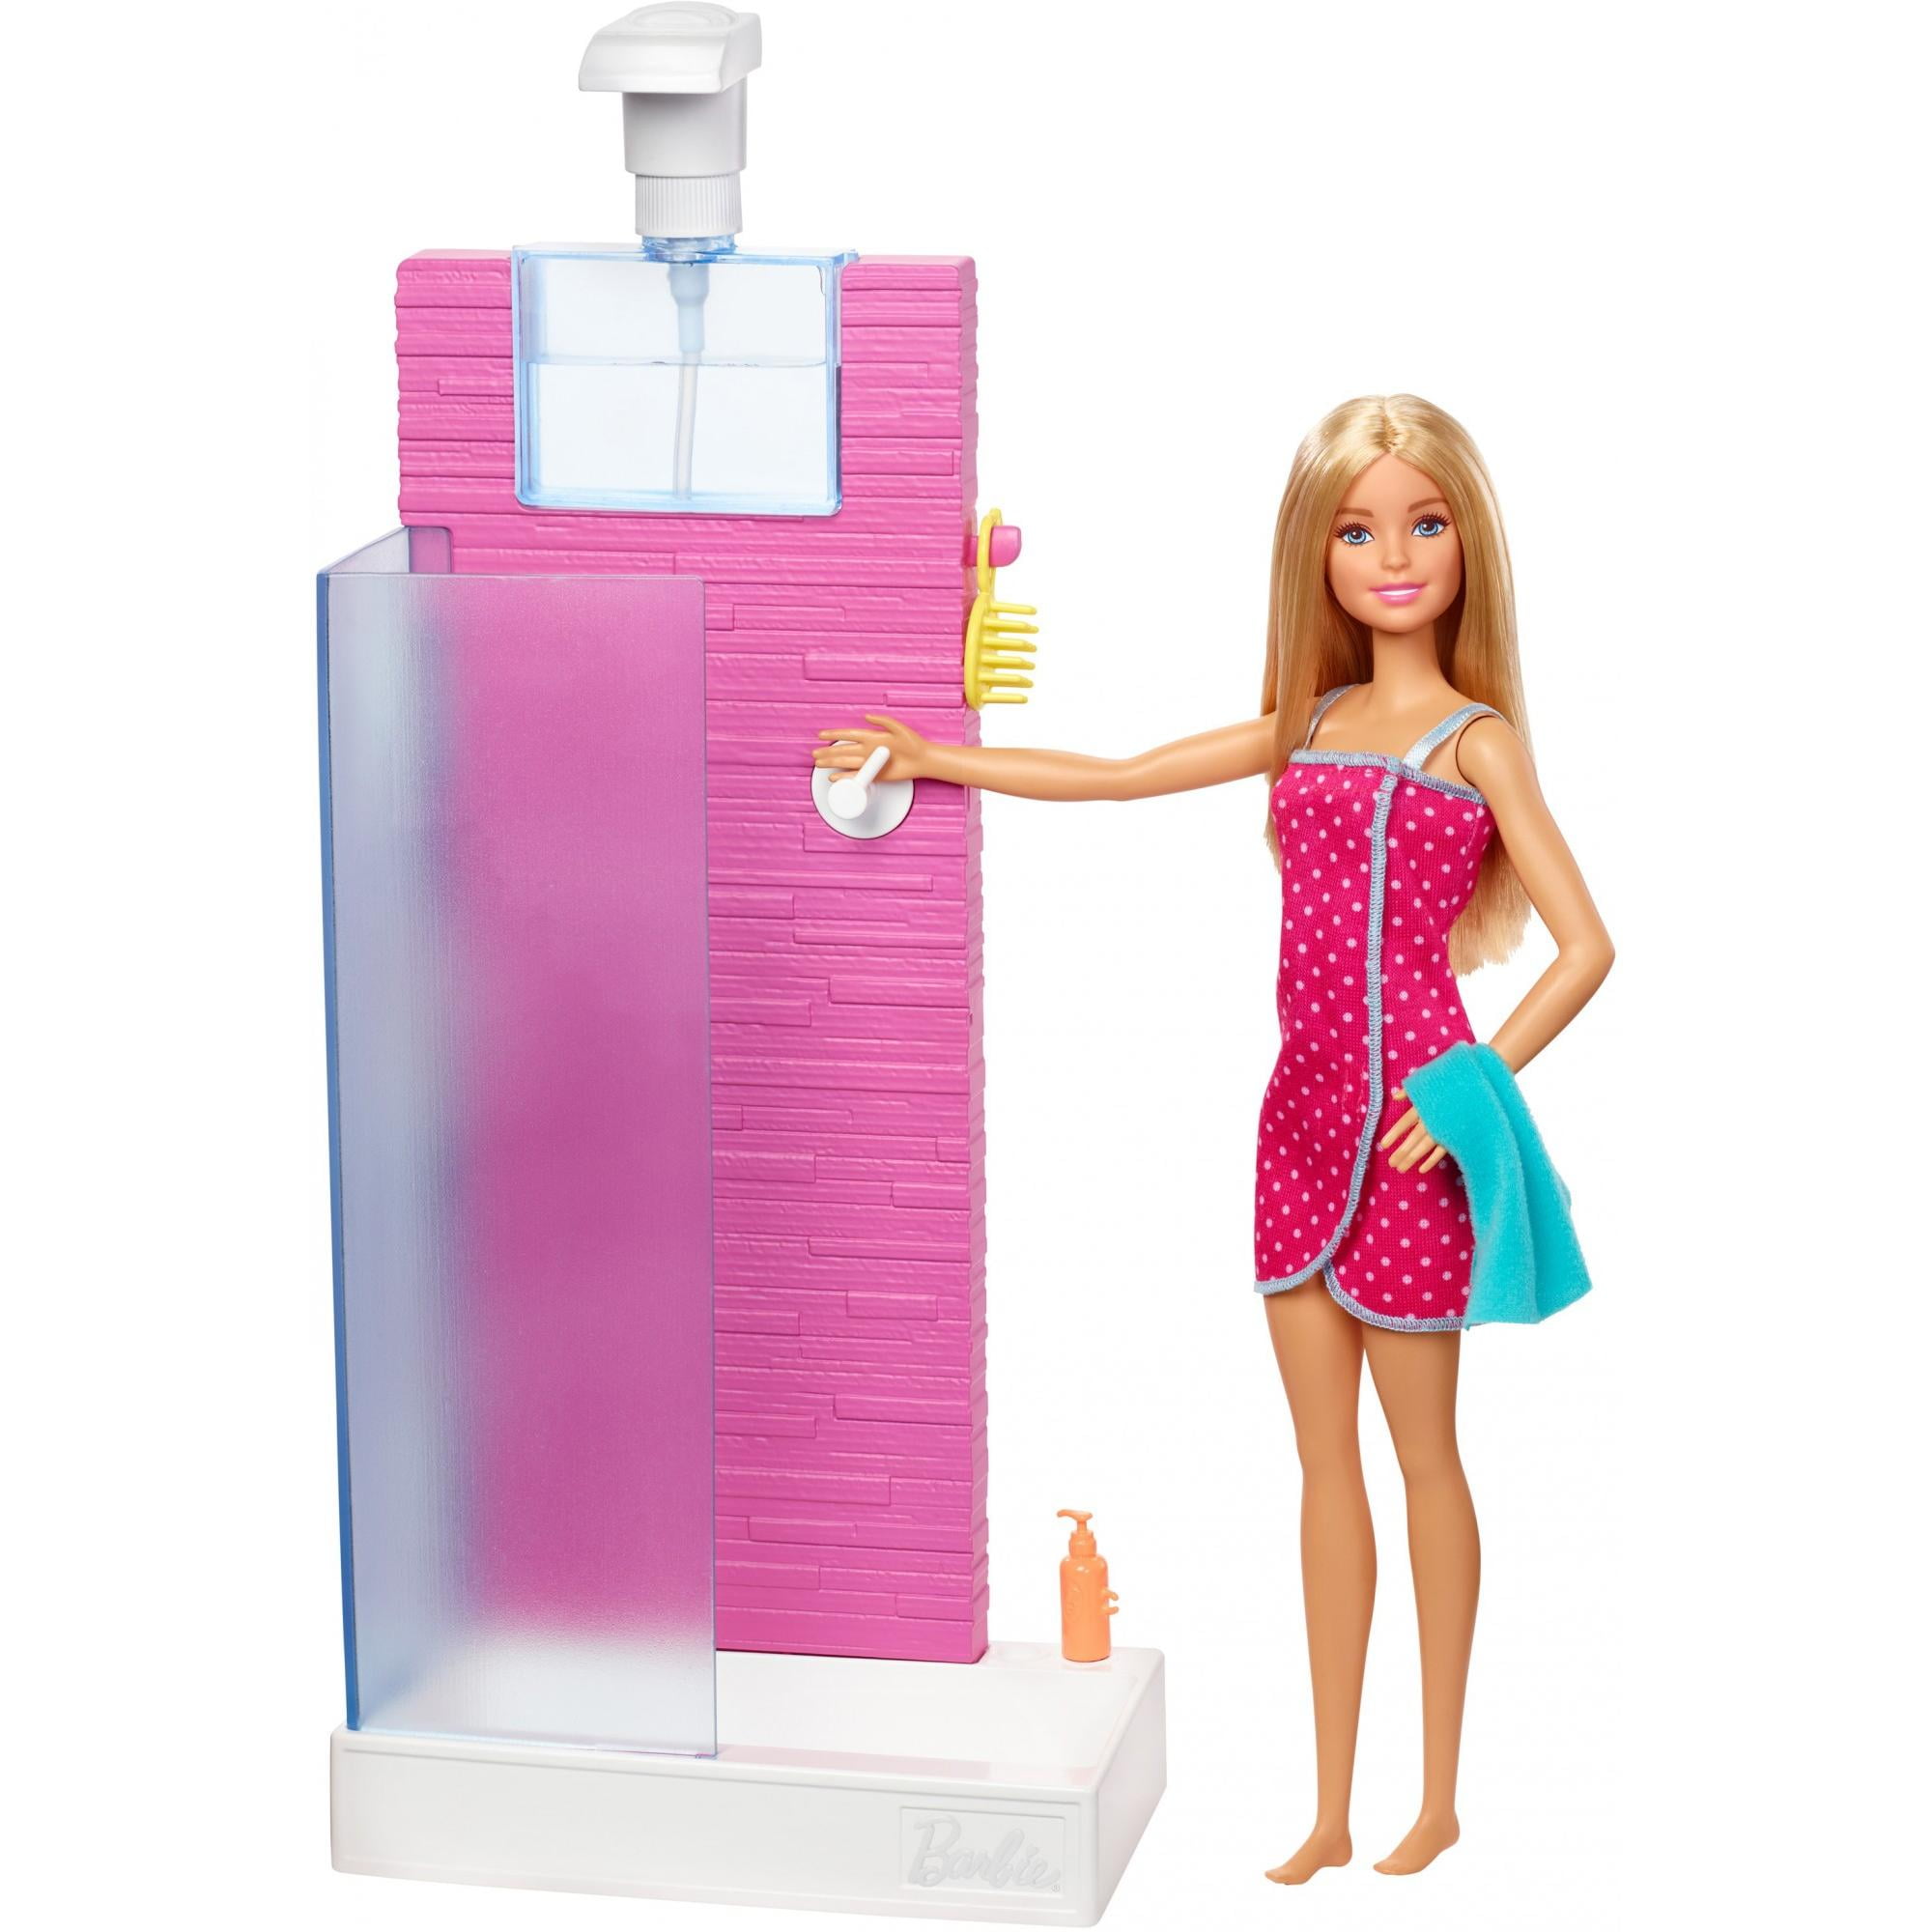 Barbie Estate & with Doll Playsets - Walmart.com